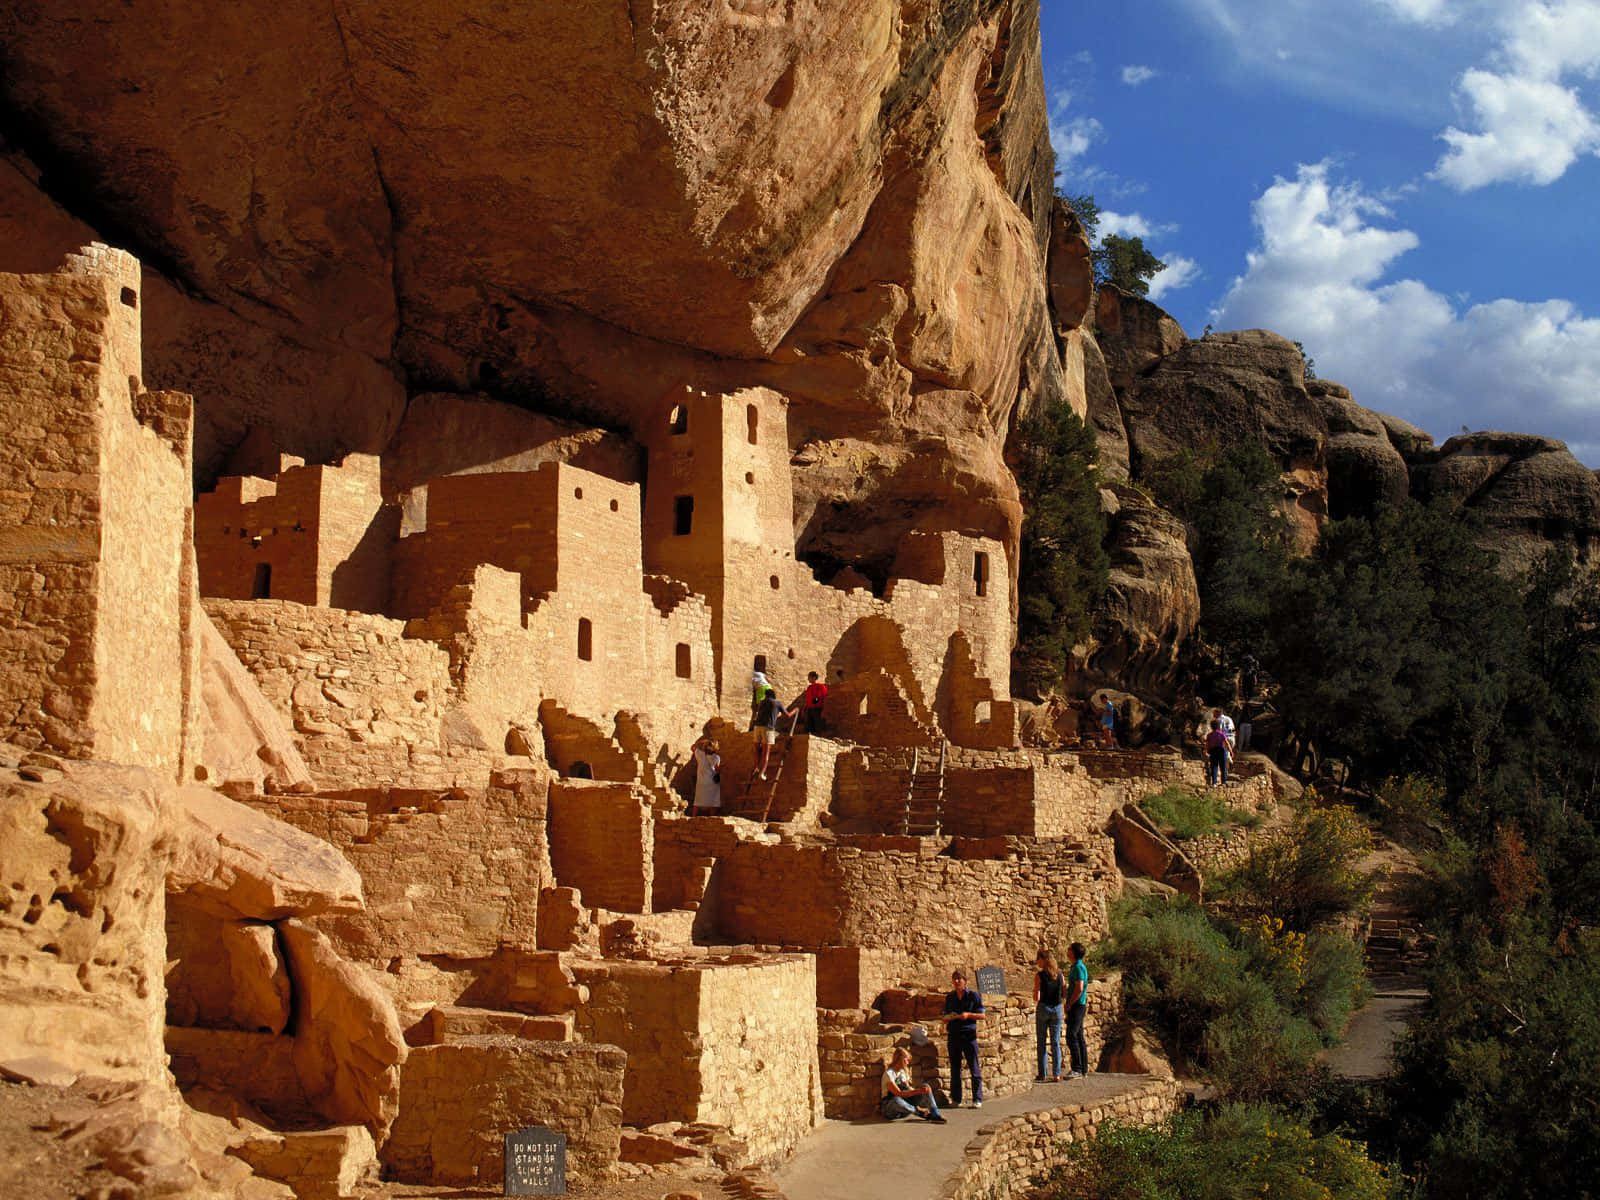 People Touring The Cliff Palace Mesa Verde National Park Wallpaper